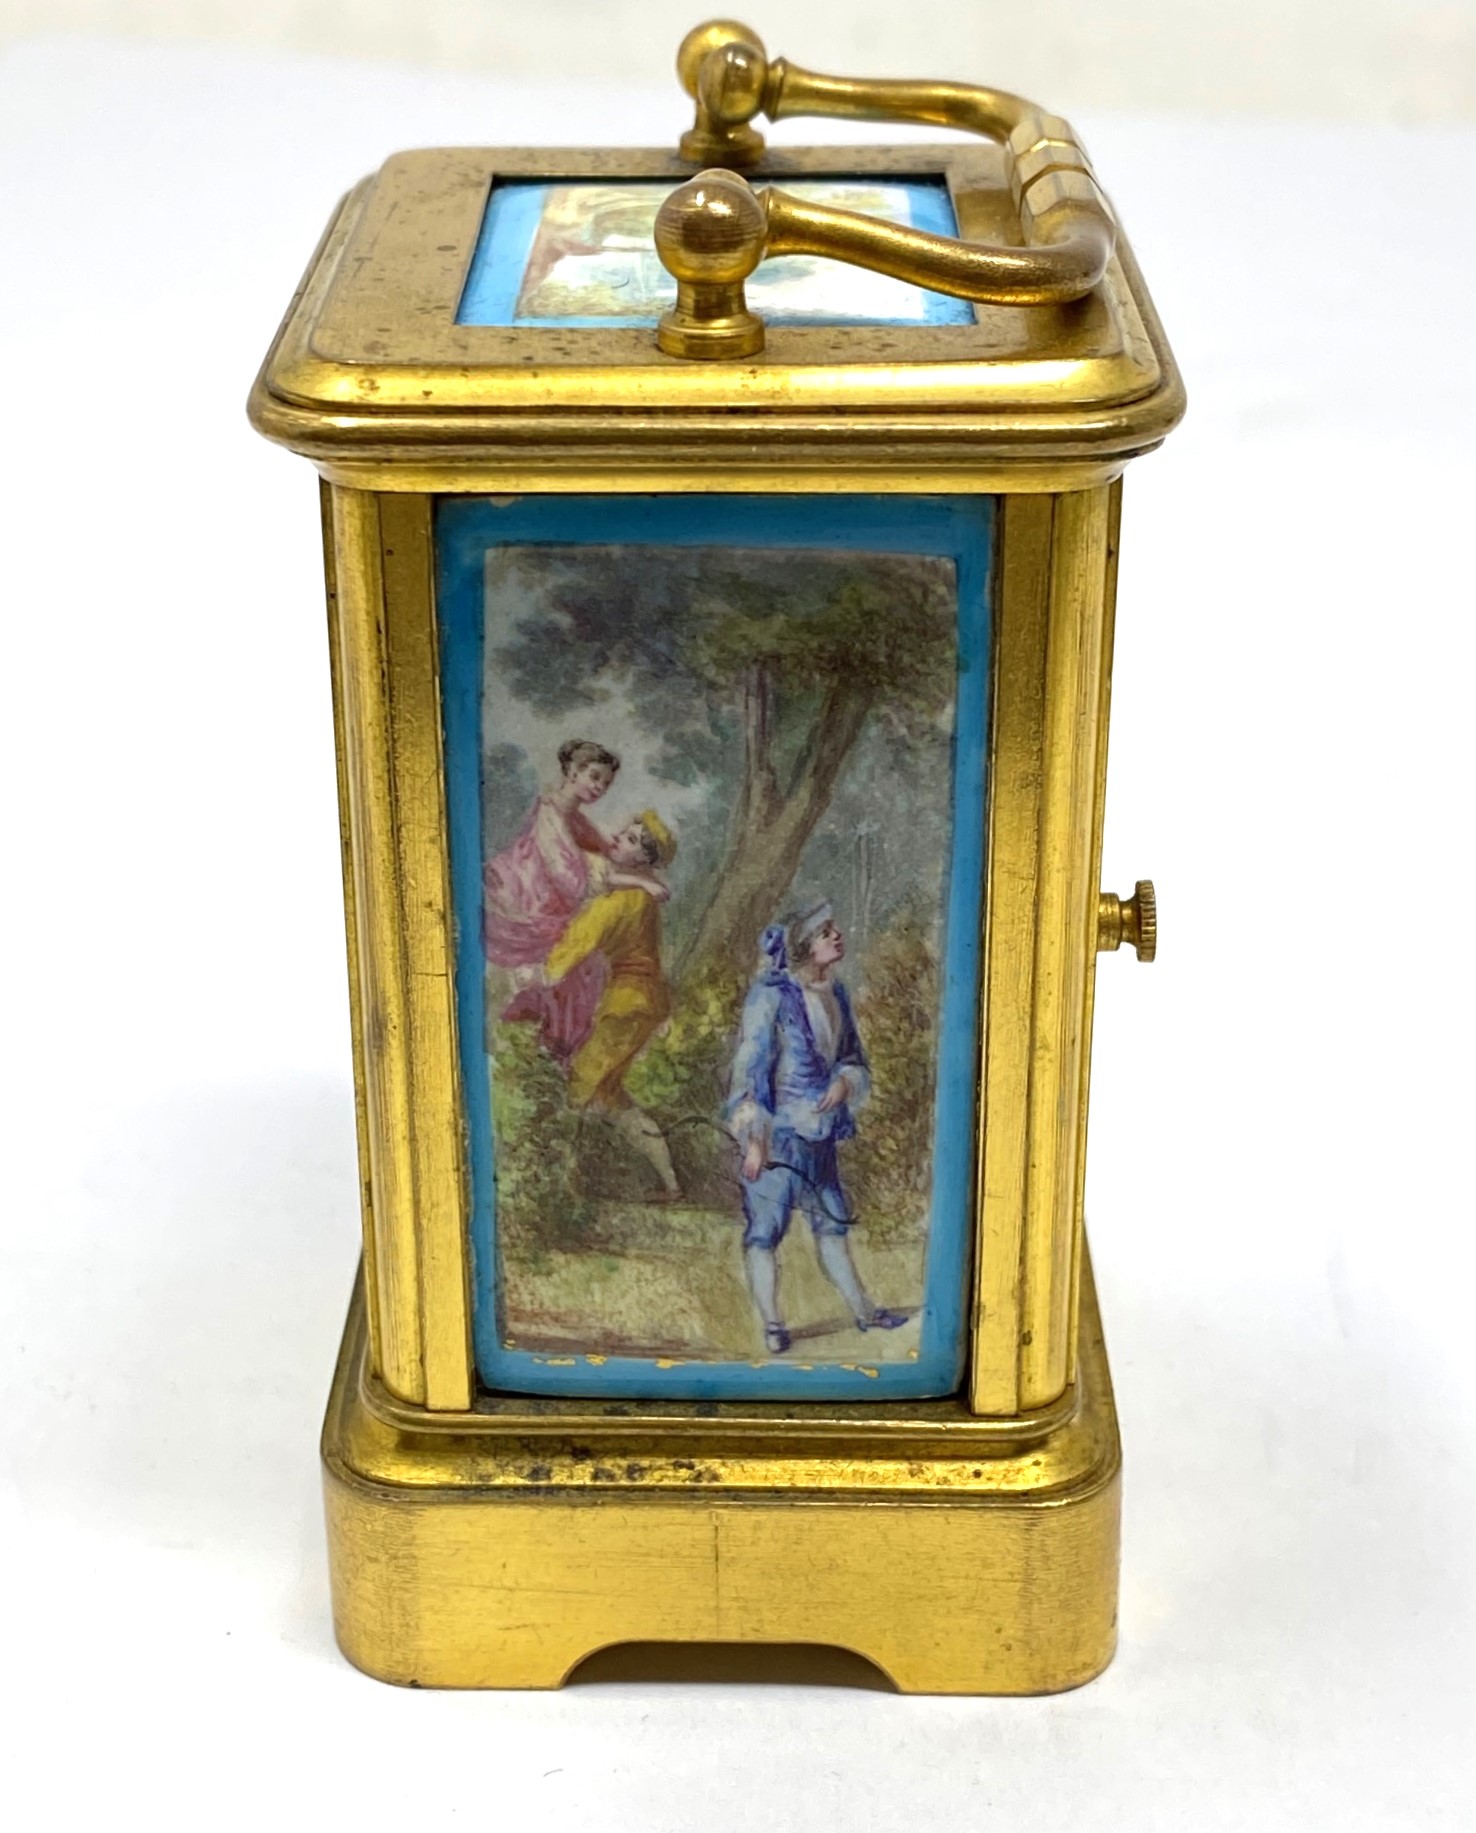 A FRENCH GILT-BRASS AND ENAMEL MINIATURE CARRIAGE CLOCK, PERHAPS J. DEJARDIN, PARIS, FOR RETAIL BY - Image 7 of 8